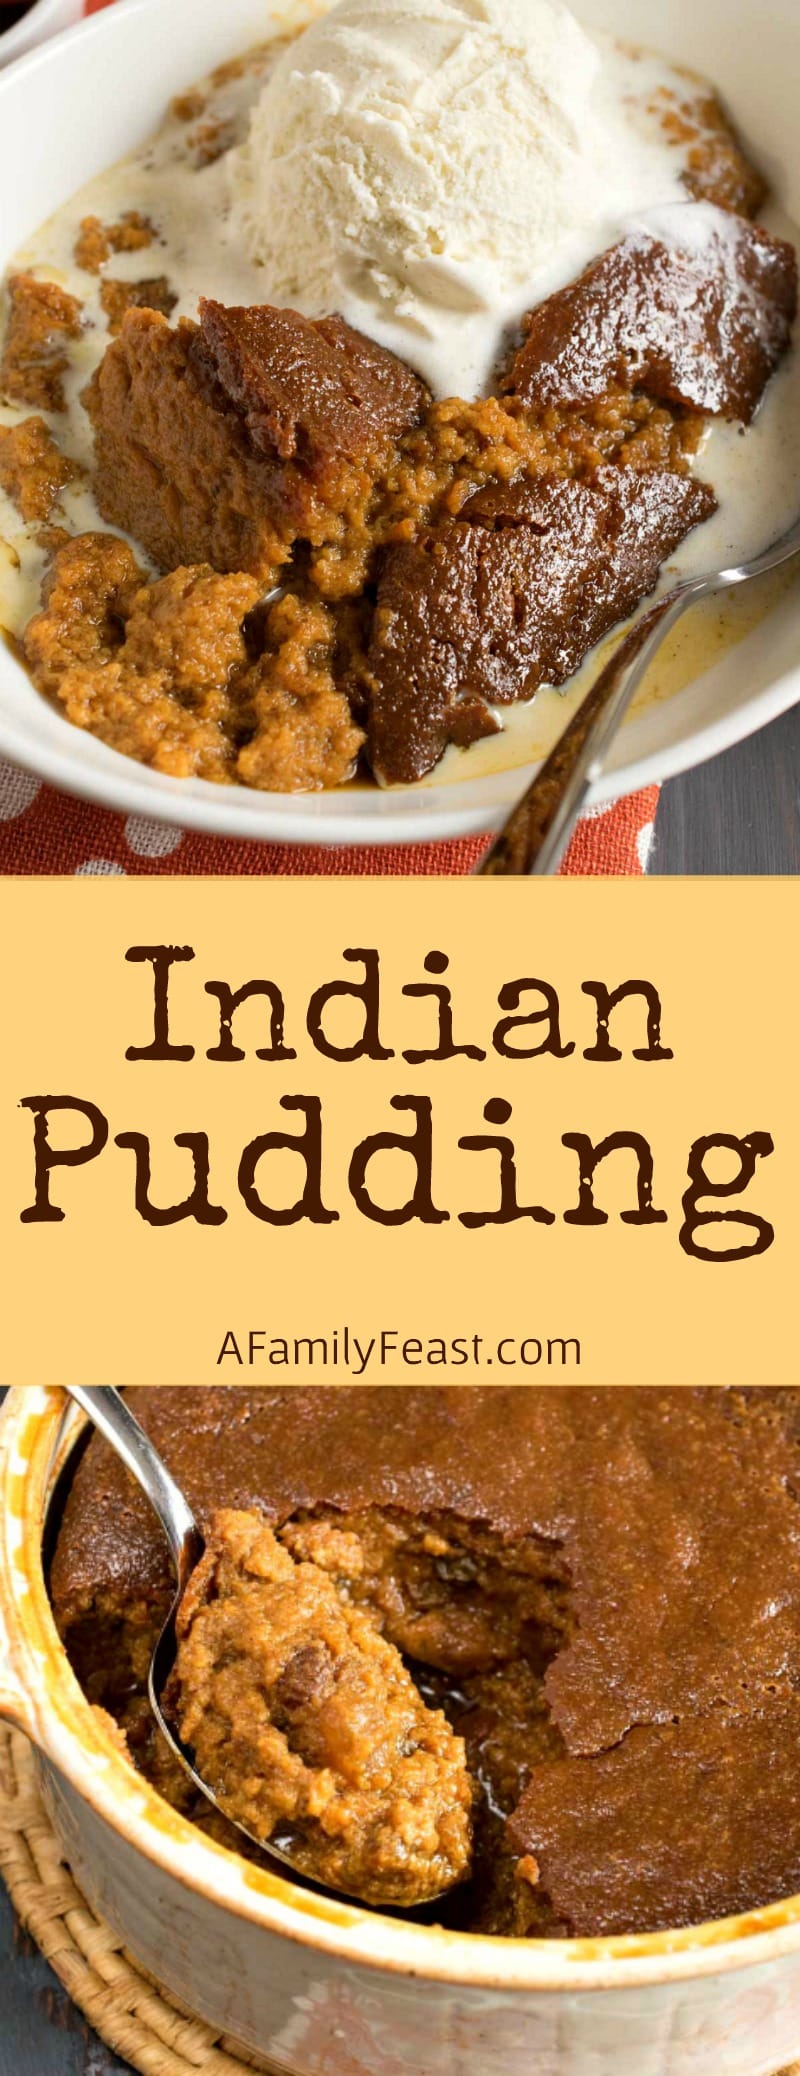 Indian Pudding is a classic New England dessert made with milk, molasses and corn meal. It's absolutely delicious and deserves a place on any Thanksgiving dessert table!